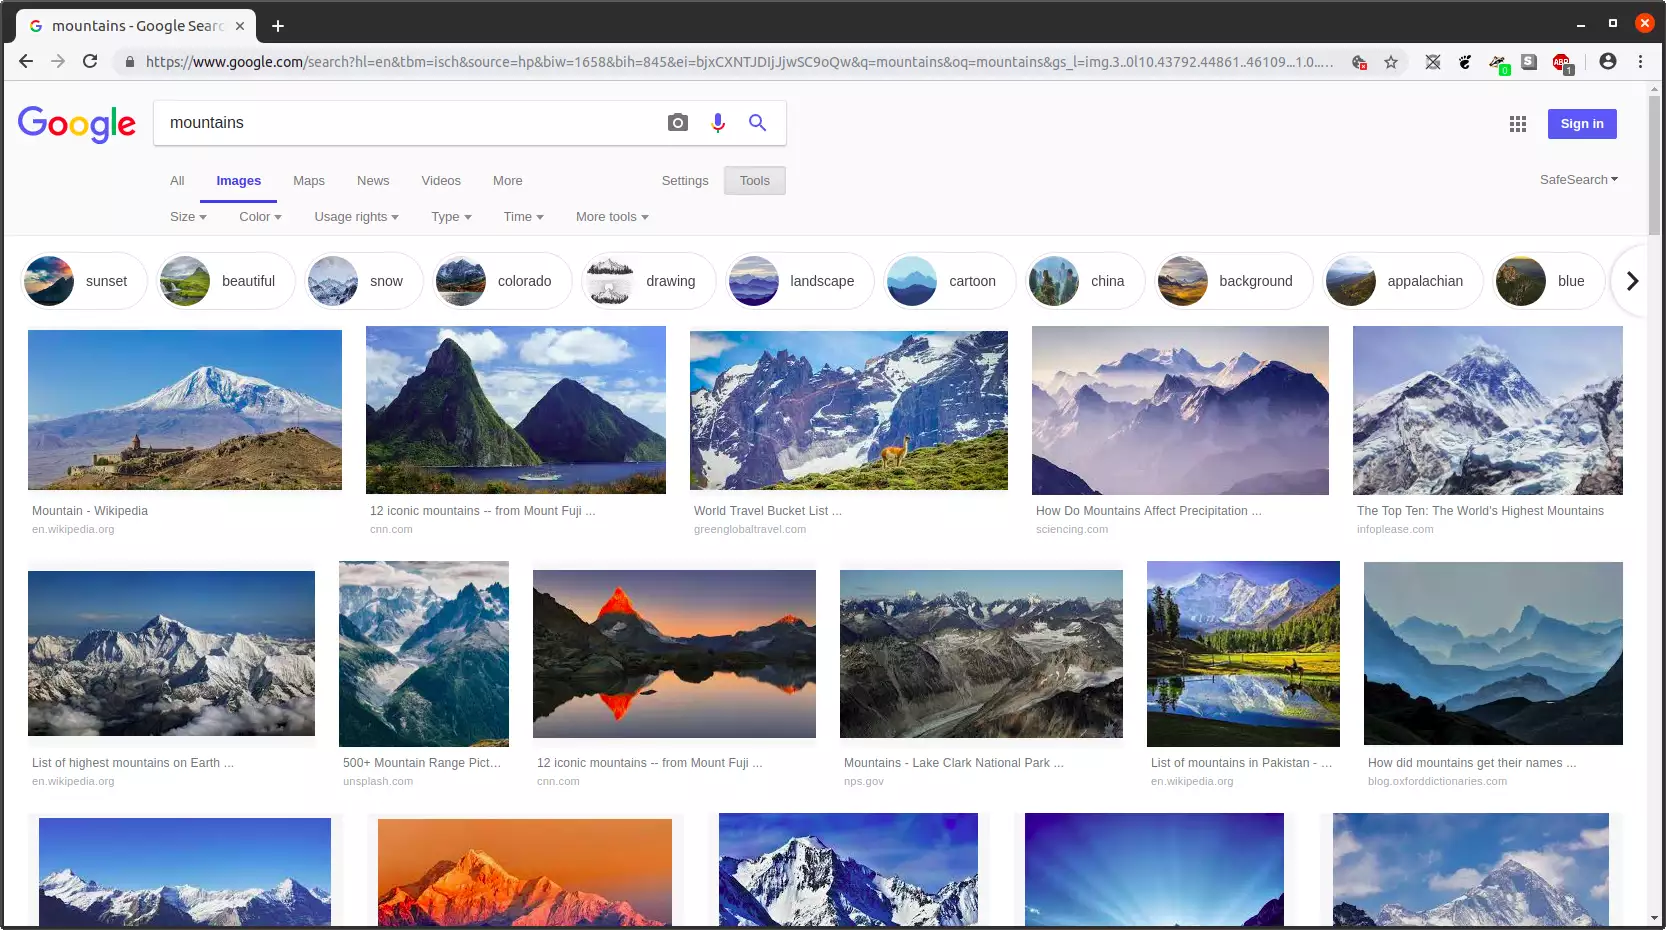 Google Images search tools